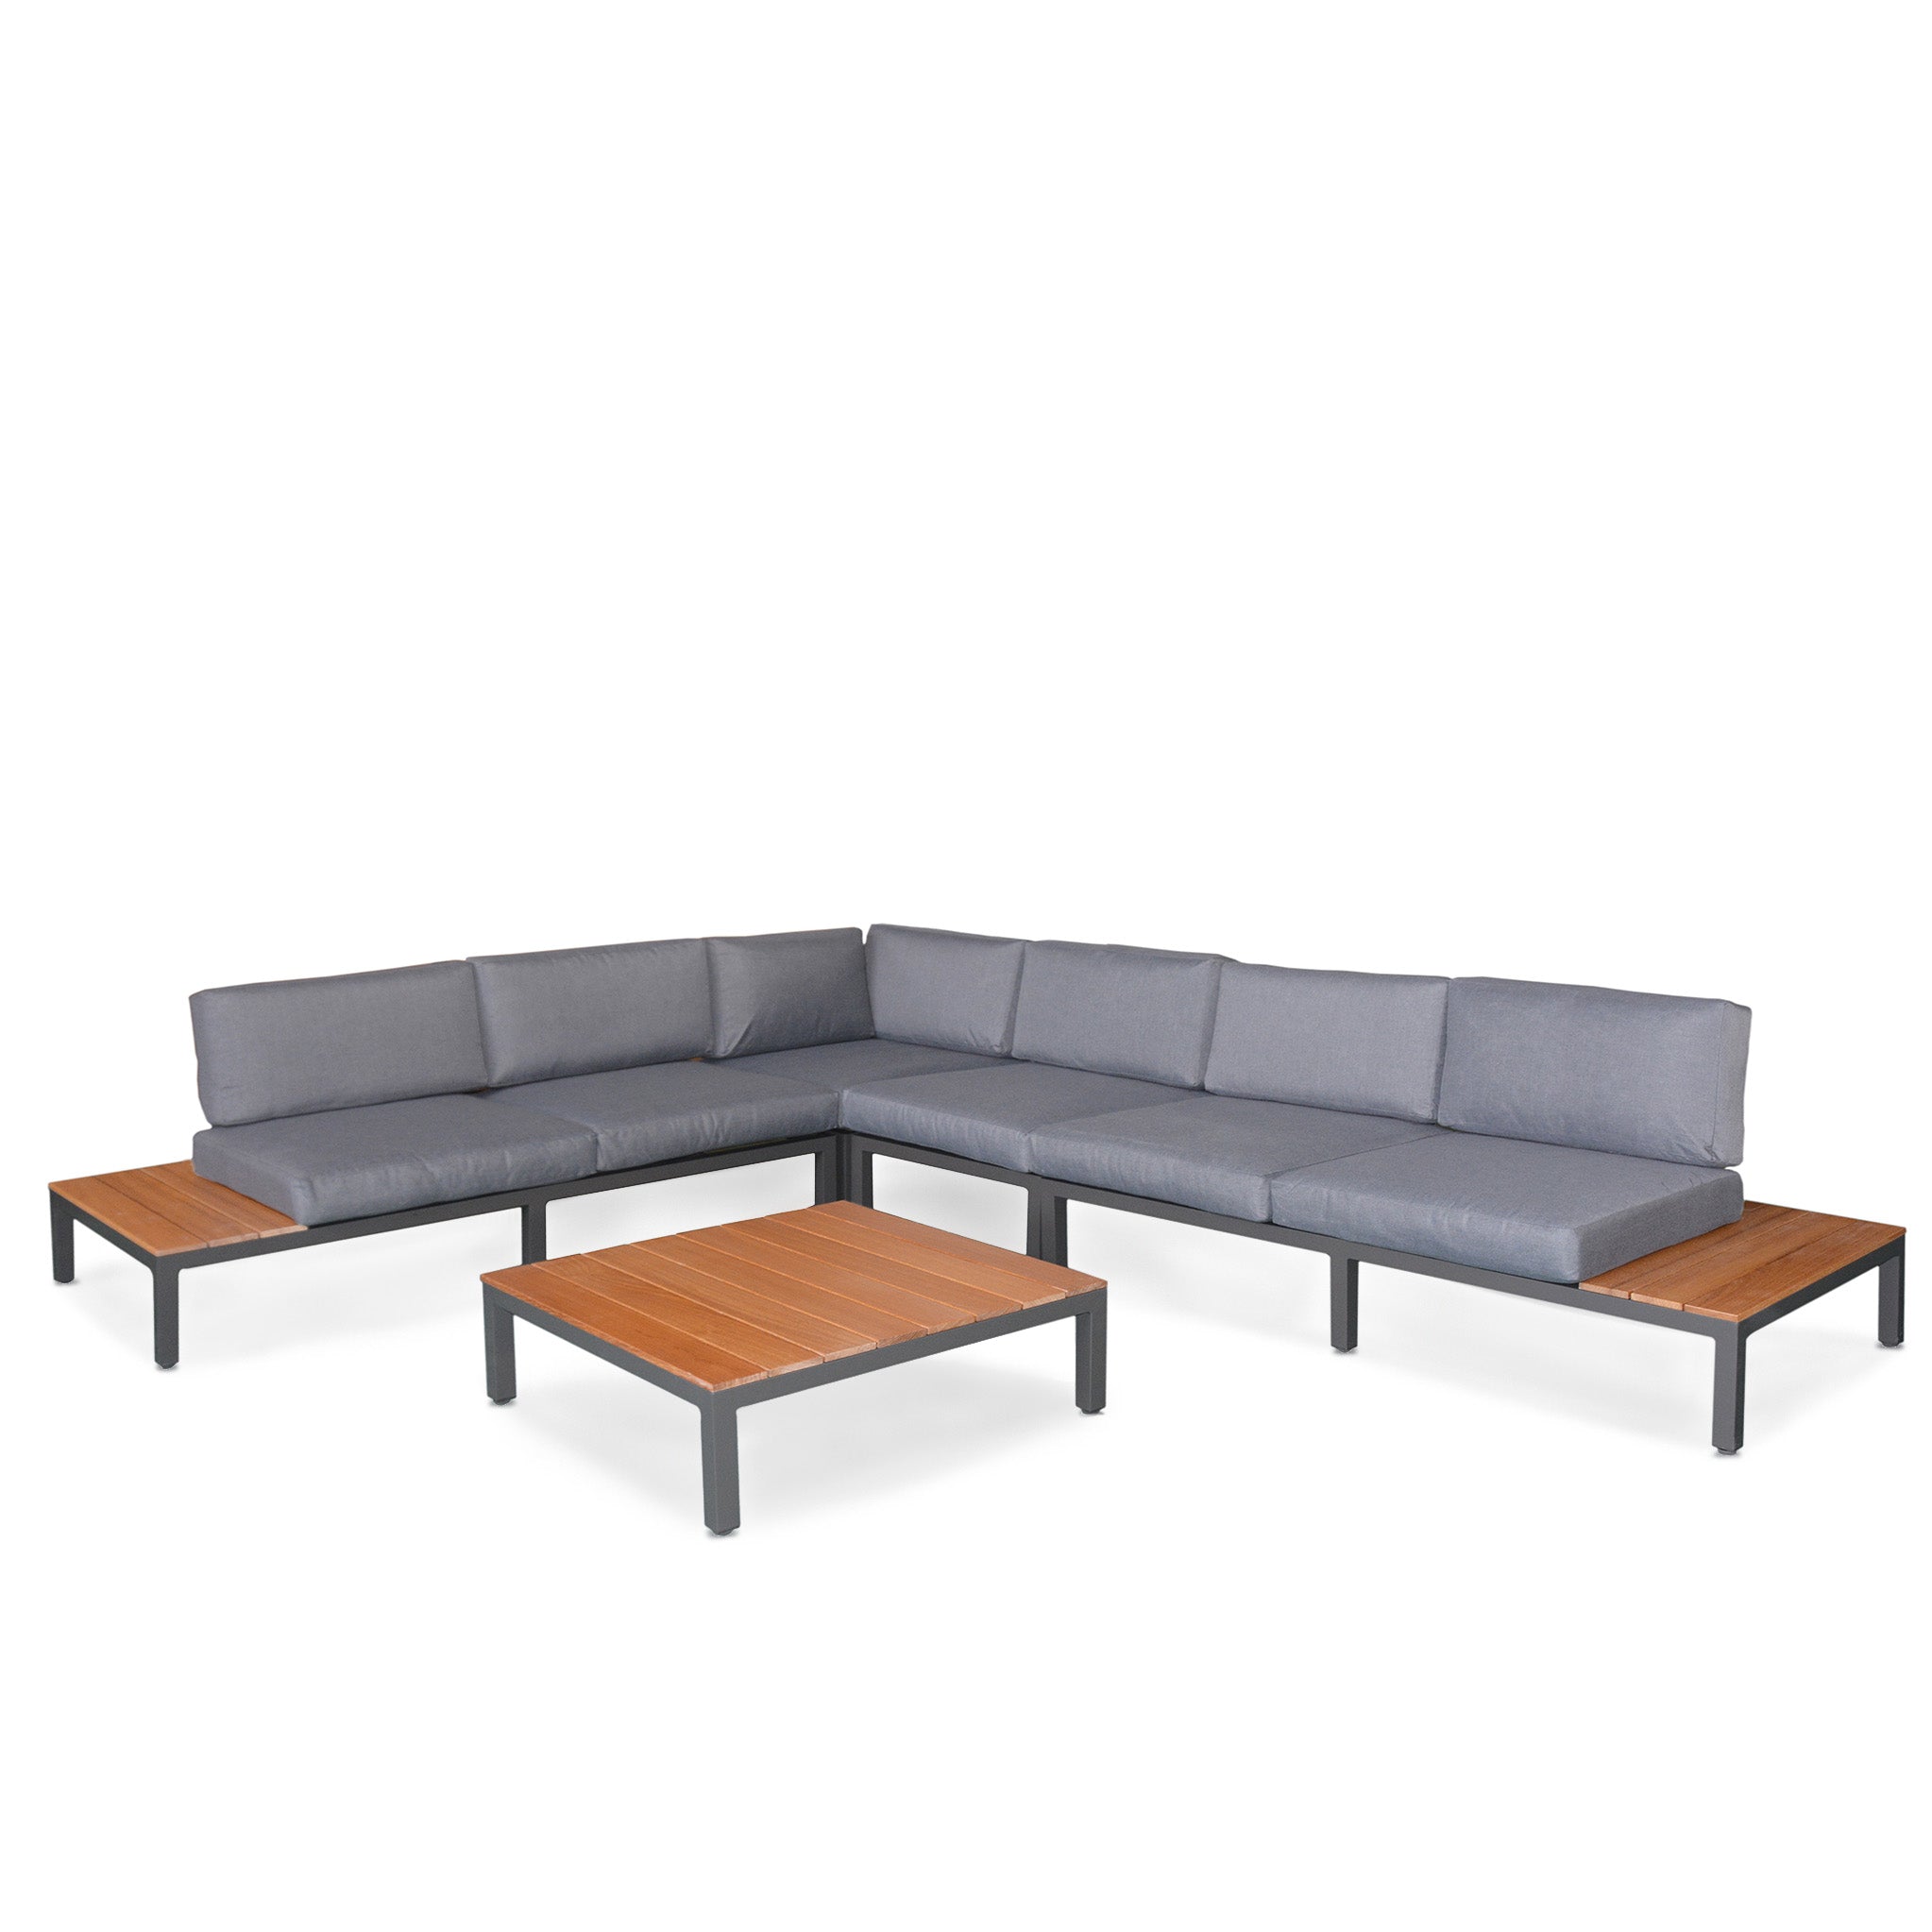 Aspen Garden Lounge Set With Teak Wooden Coffee And Side Tables